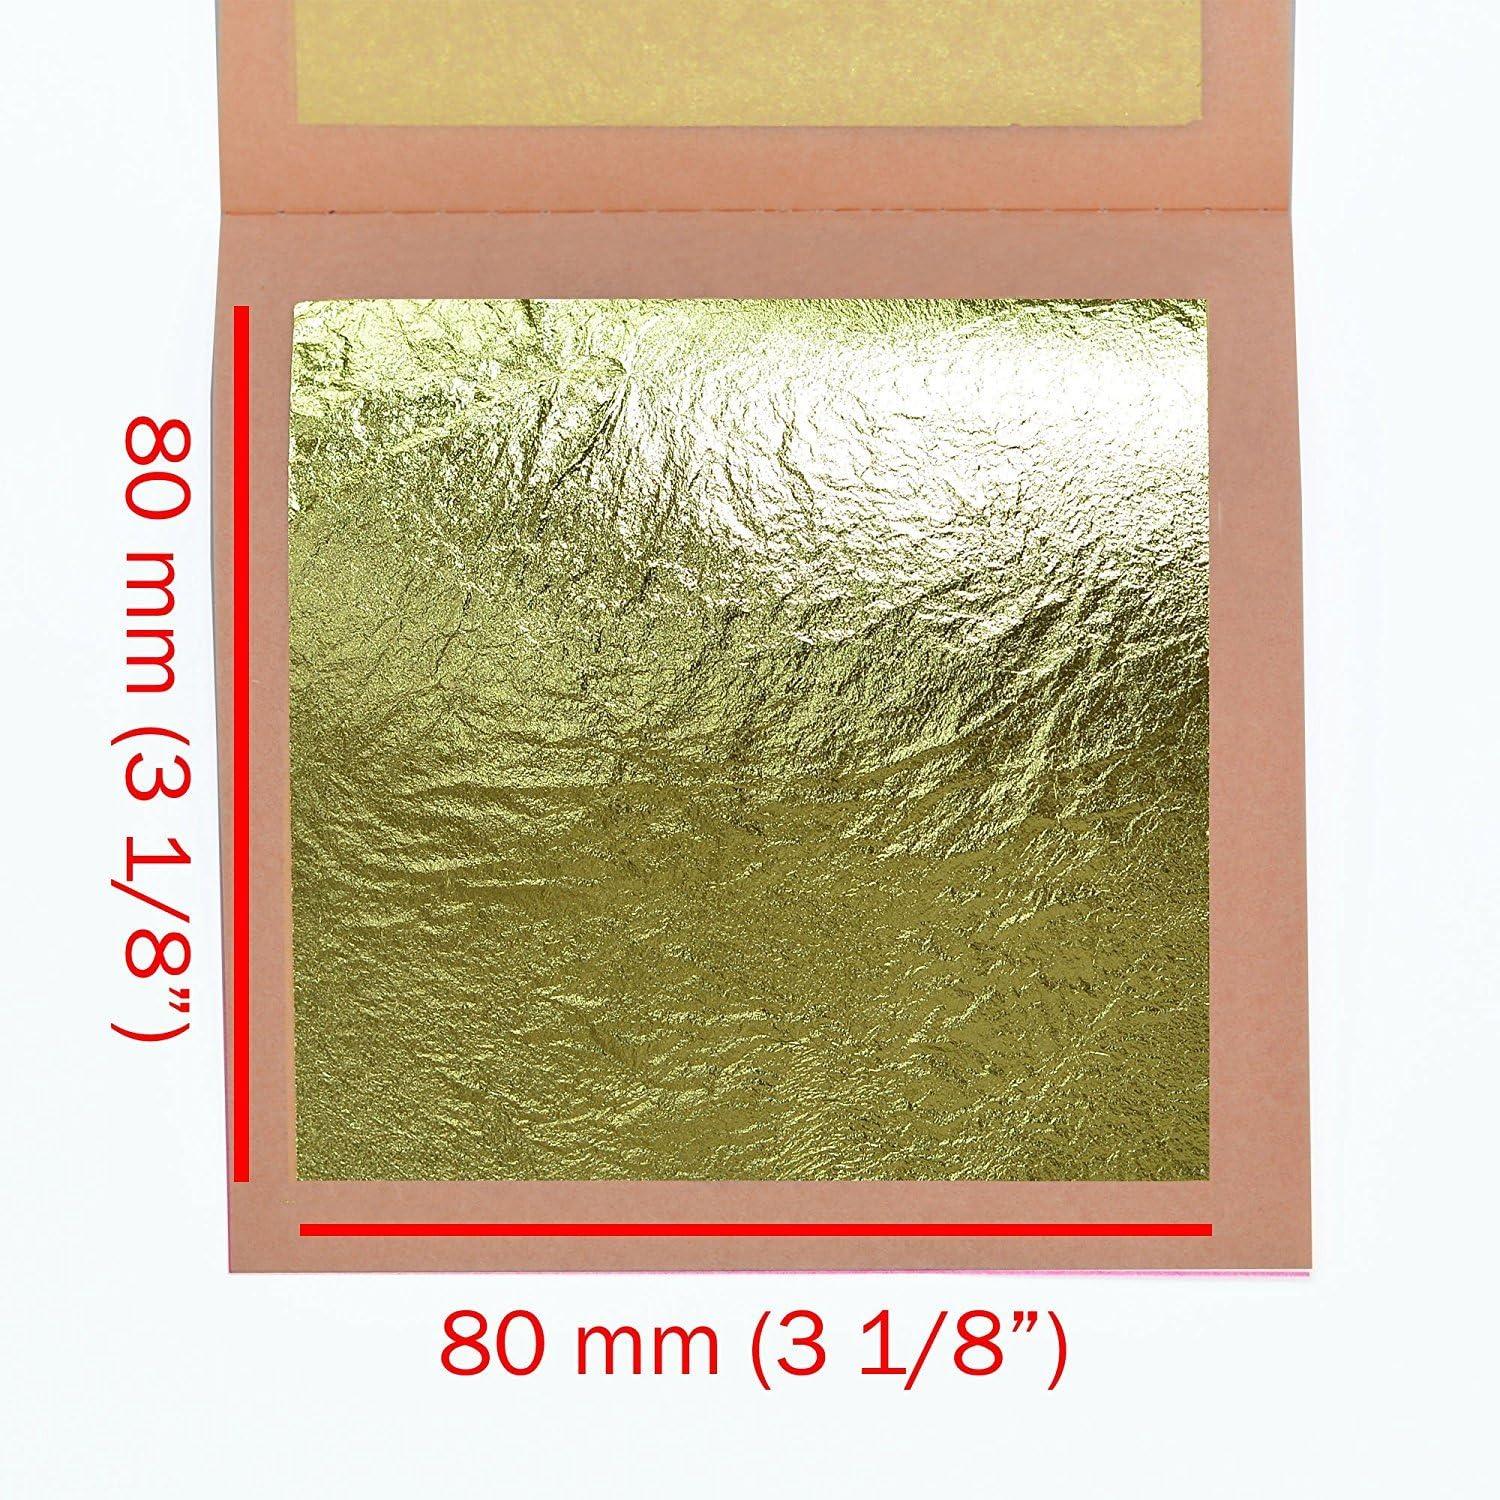 Gold Leaf vs Gold Paint: Which Is Better? - Barnabas Gold